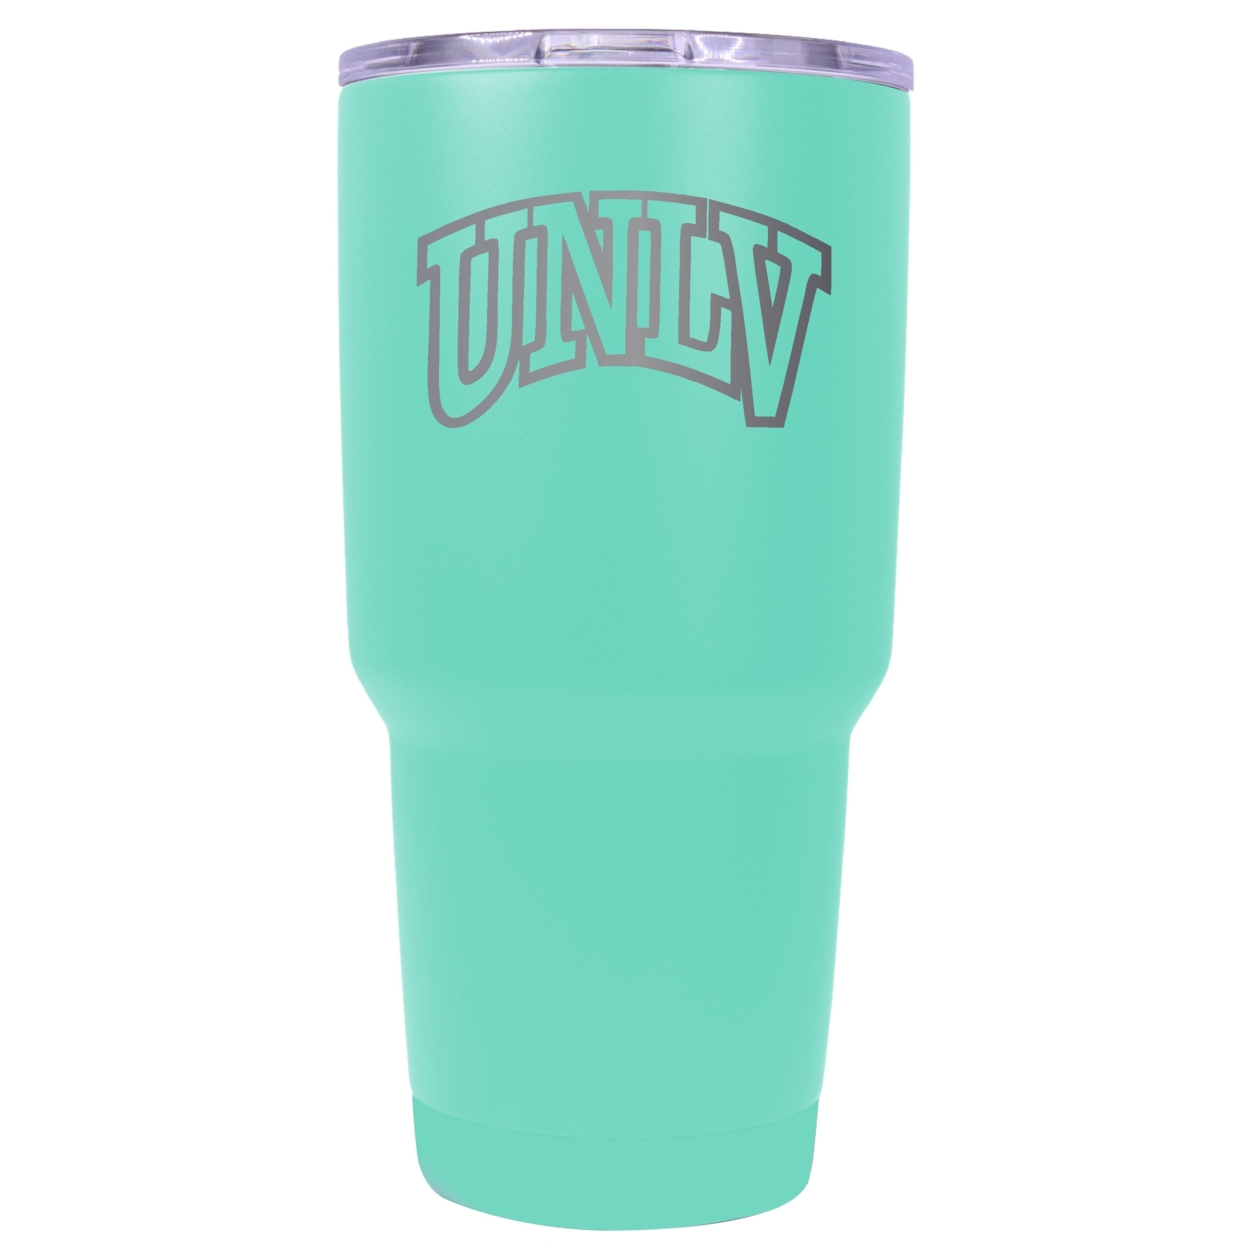 UNLV Rebels 24 Oz Laser Engraved Stainless Steel Insulated Tumbler - Choose Your Color. - Navy